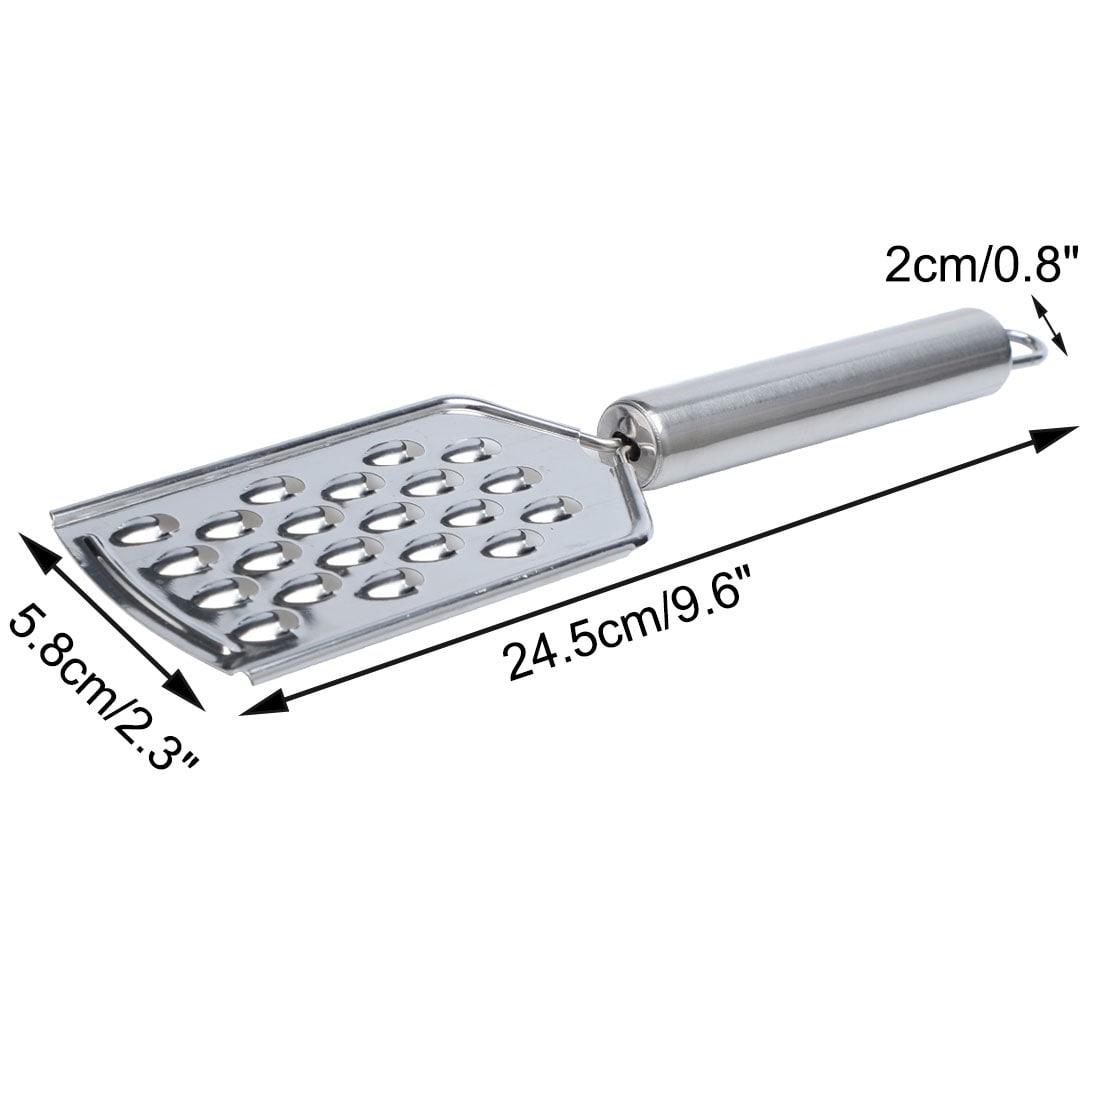 https://ak1.ostkcdn.com/images/products/is/images/direct/b4168149b6aaf8f1fcab6339d9457515c0fe90c5/Stainless-Steel-Cheese-Grater-Fruit-Flat-Vegetable-Grater-for-Restaurant.jpg